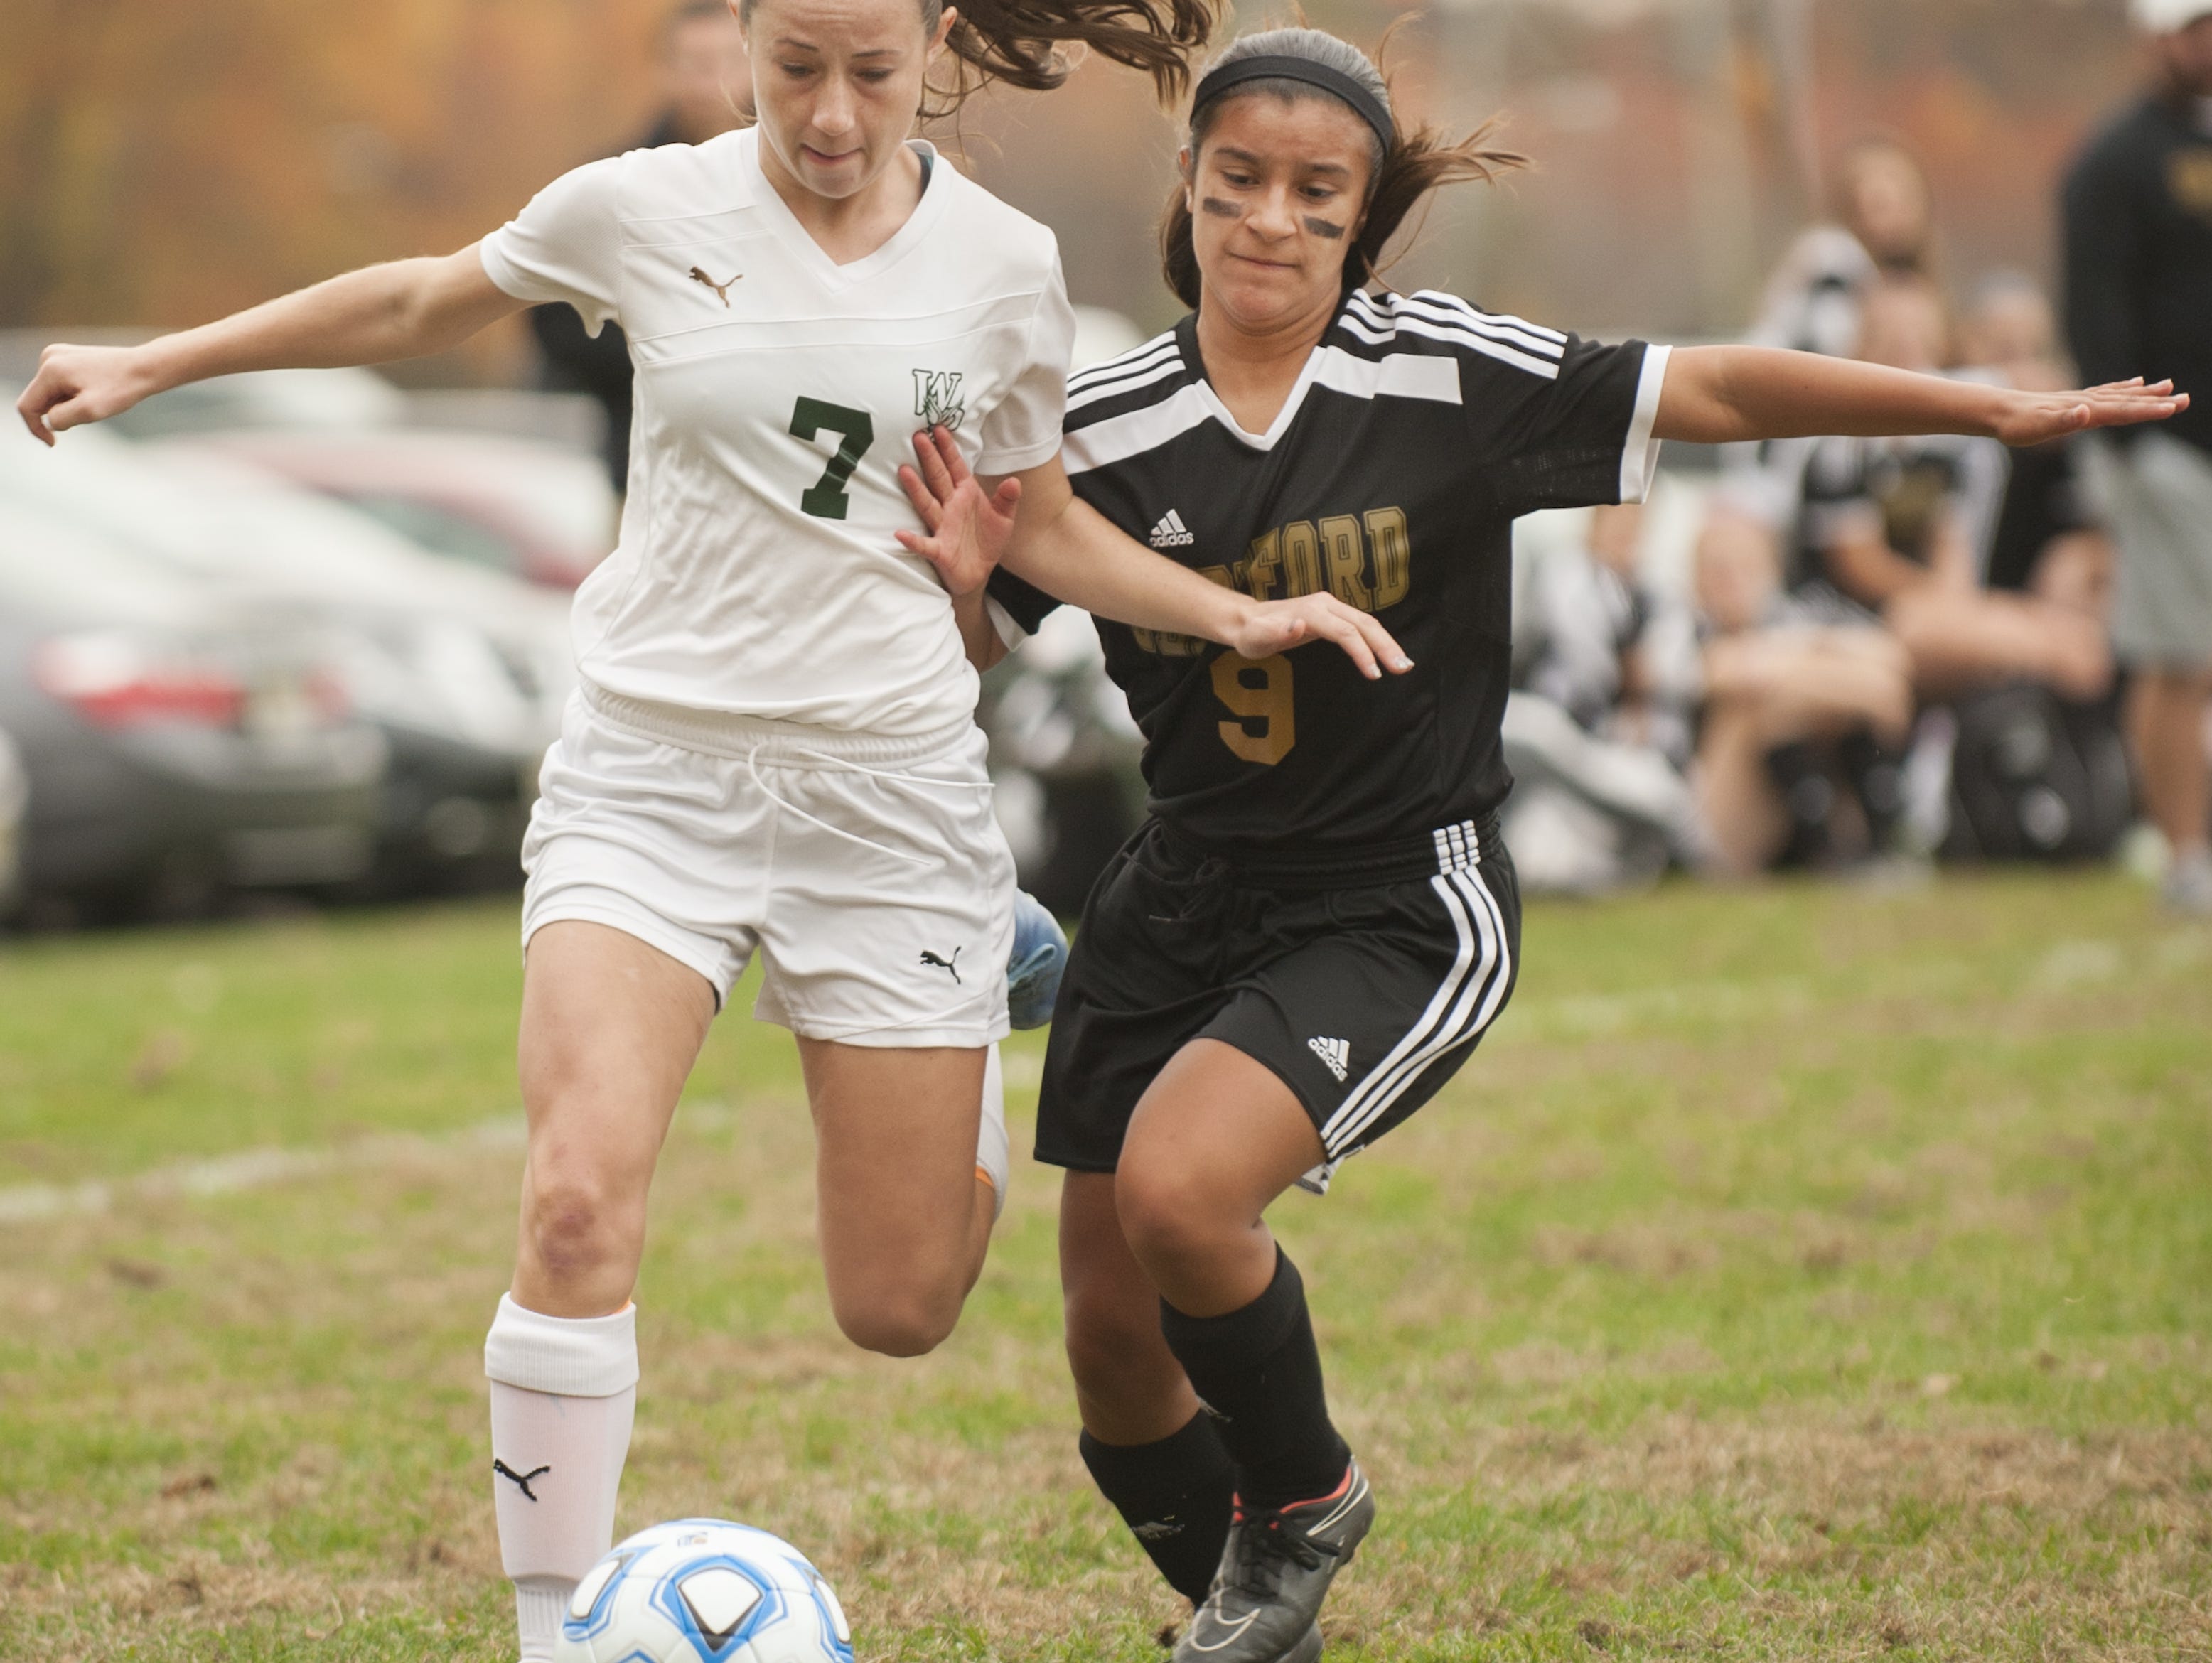 West Deptford's Emma Blades (left) and Gaby Gonzalez battle for the ball during the first half of Monday's South Jersey Group 2 playoff game.